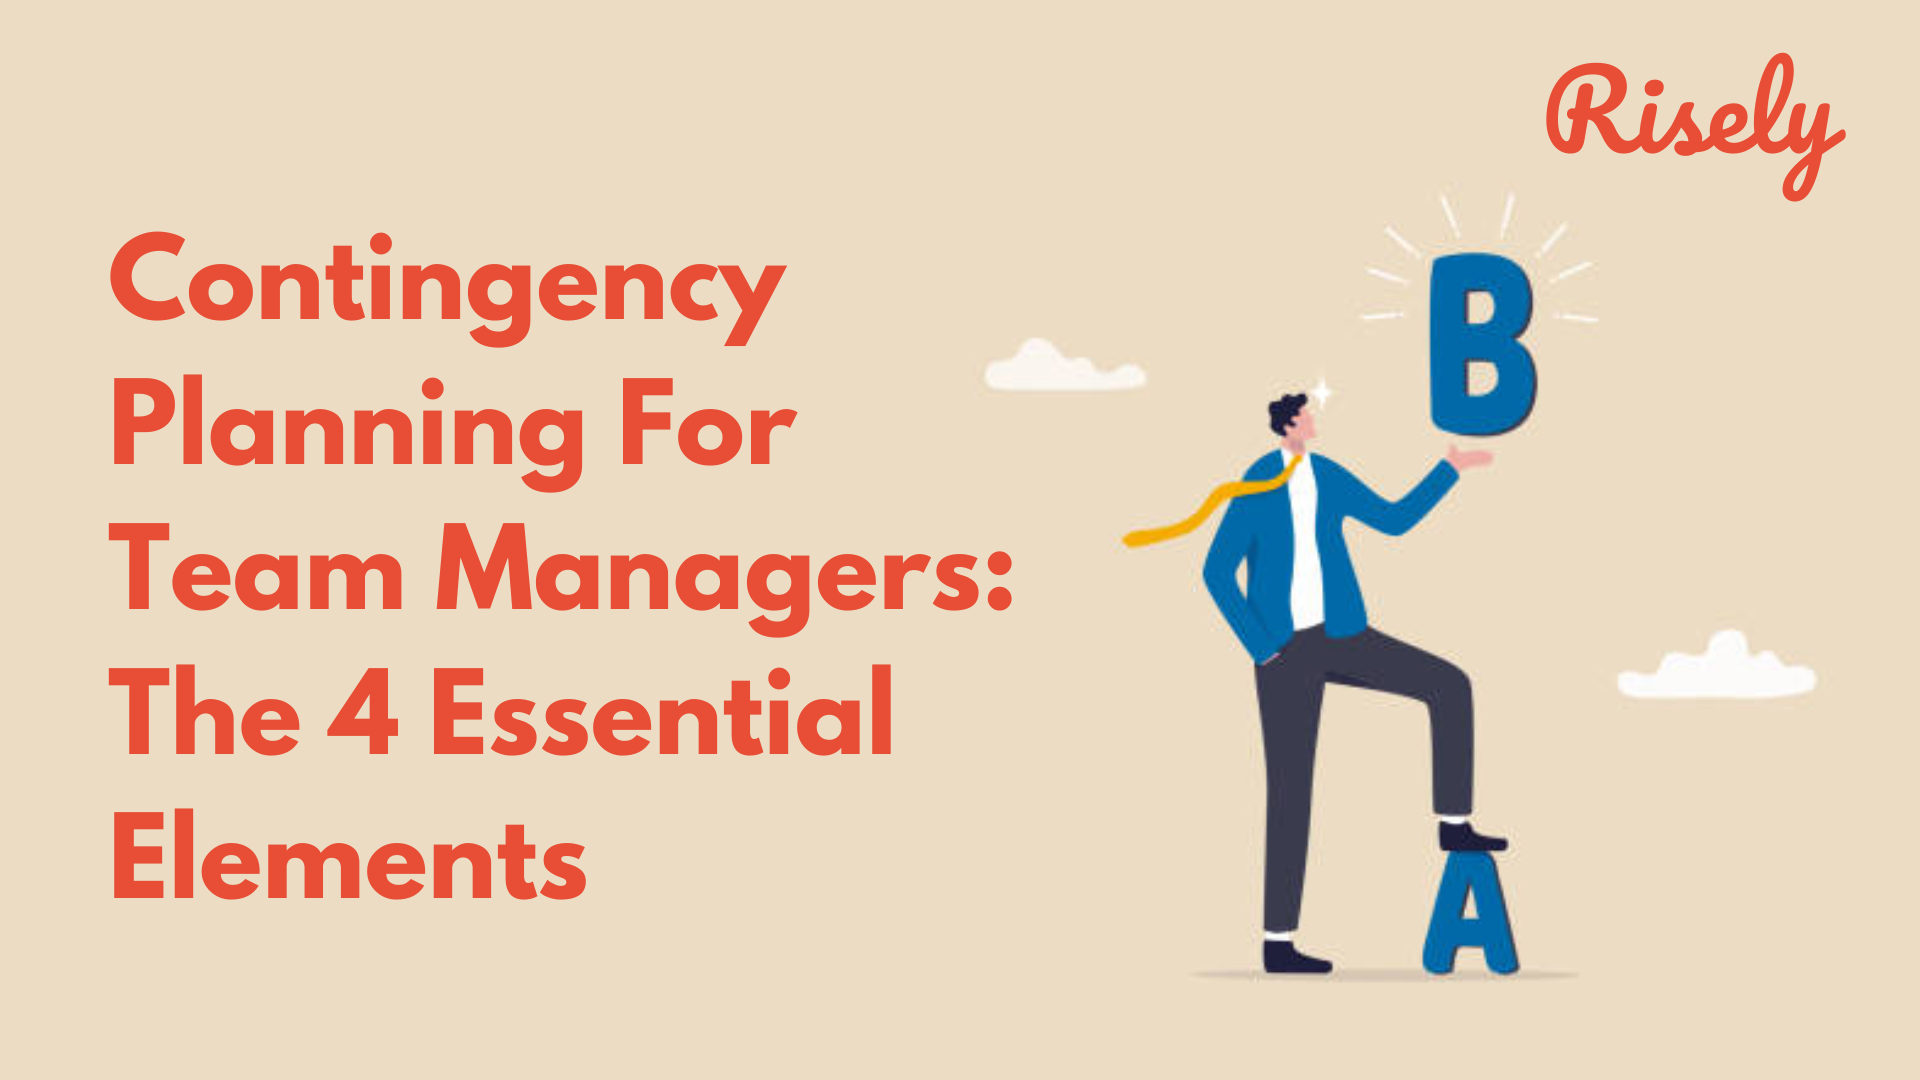 Contingency Planning For Team Managers: The 4 Essential Elements